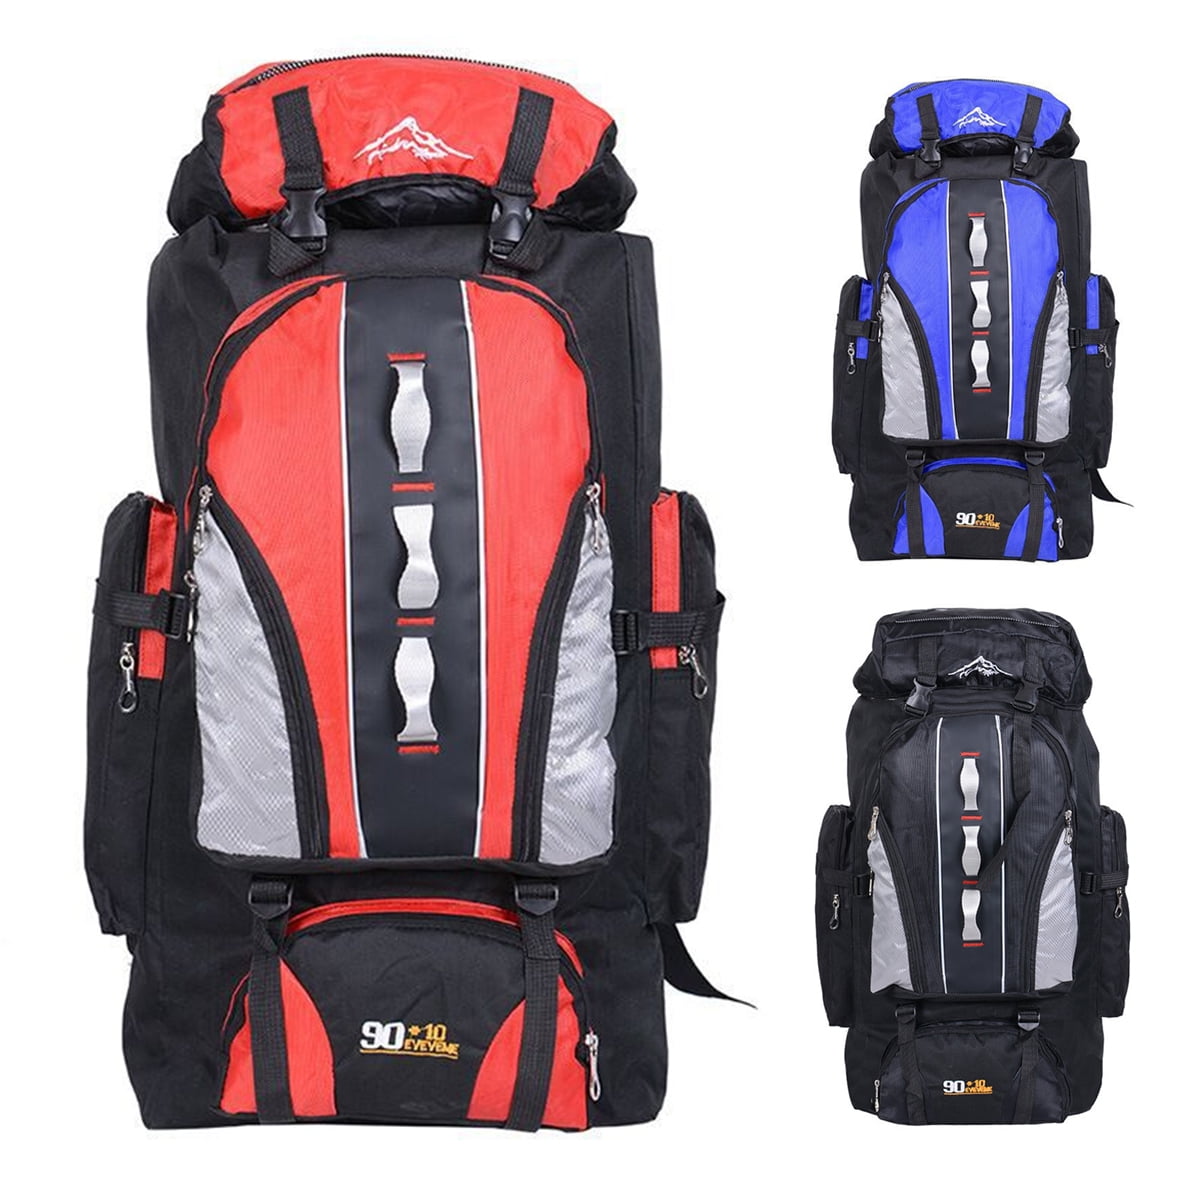 Tactical Waterproof Backpack Hiking Camping Outdoor Sports Travel Bags LC 